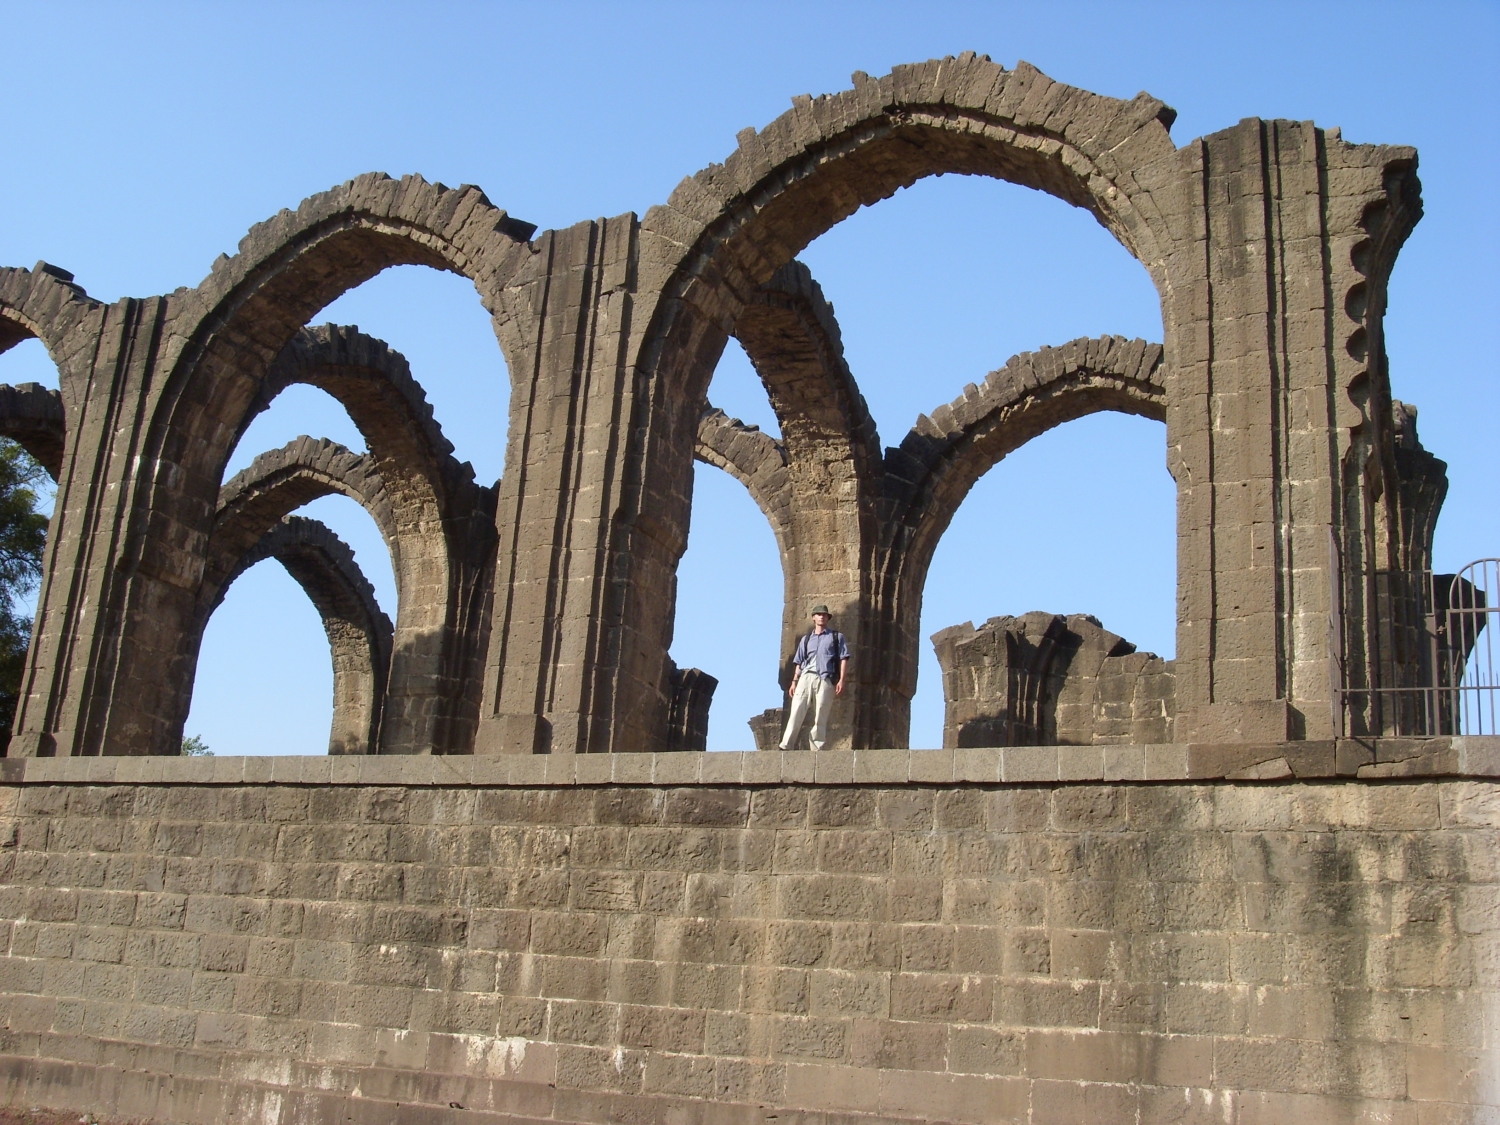 Partial exterior view of arches, showing plinth, with figure for scale